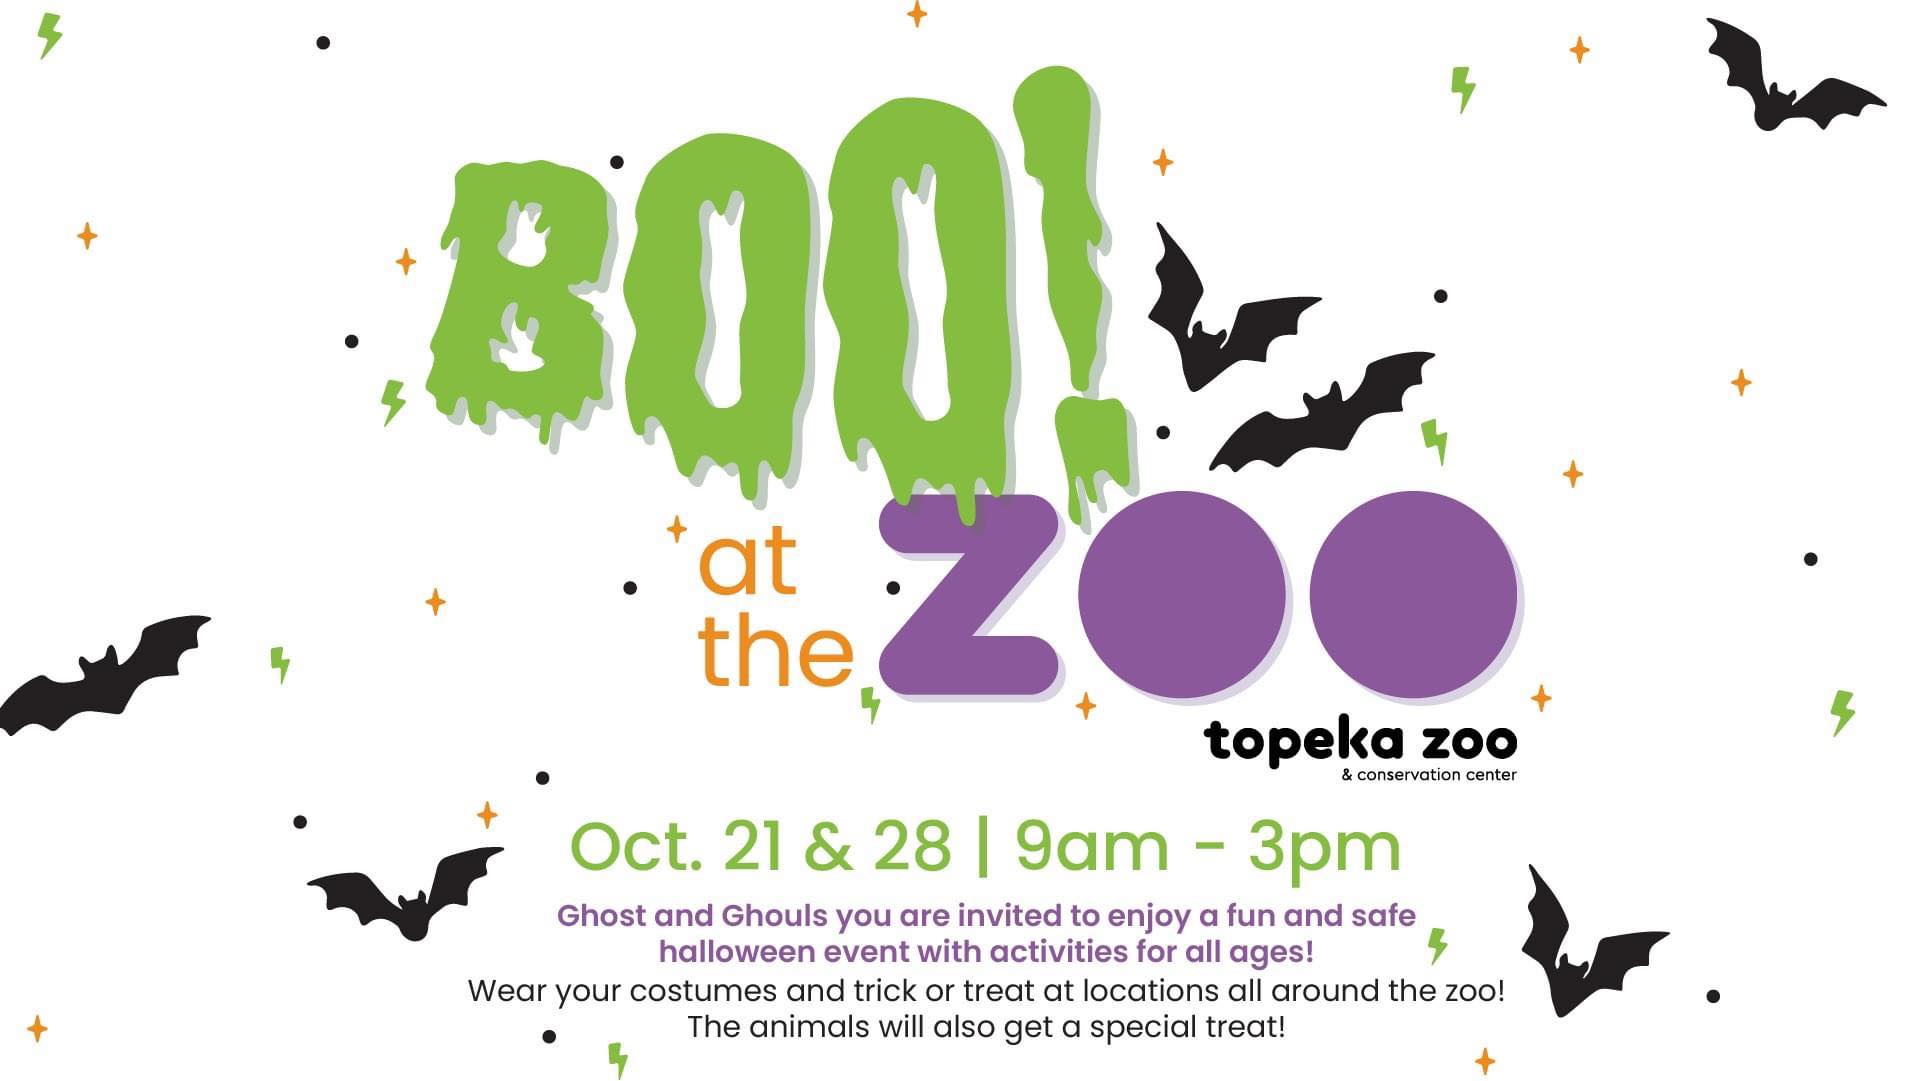 Boo at the Zoo is back and bigger than ever at the Topeka Zoo